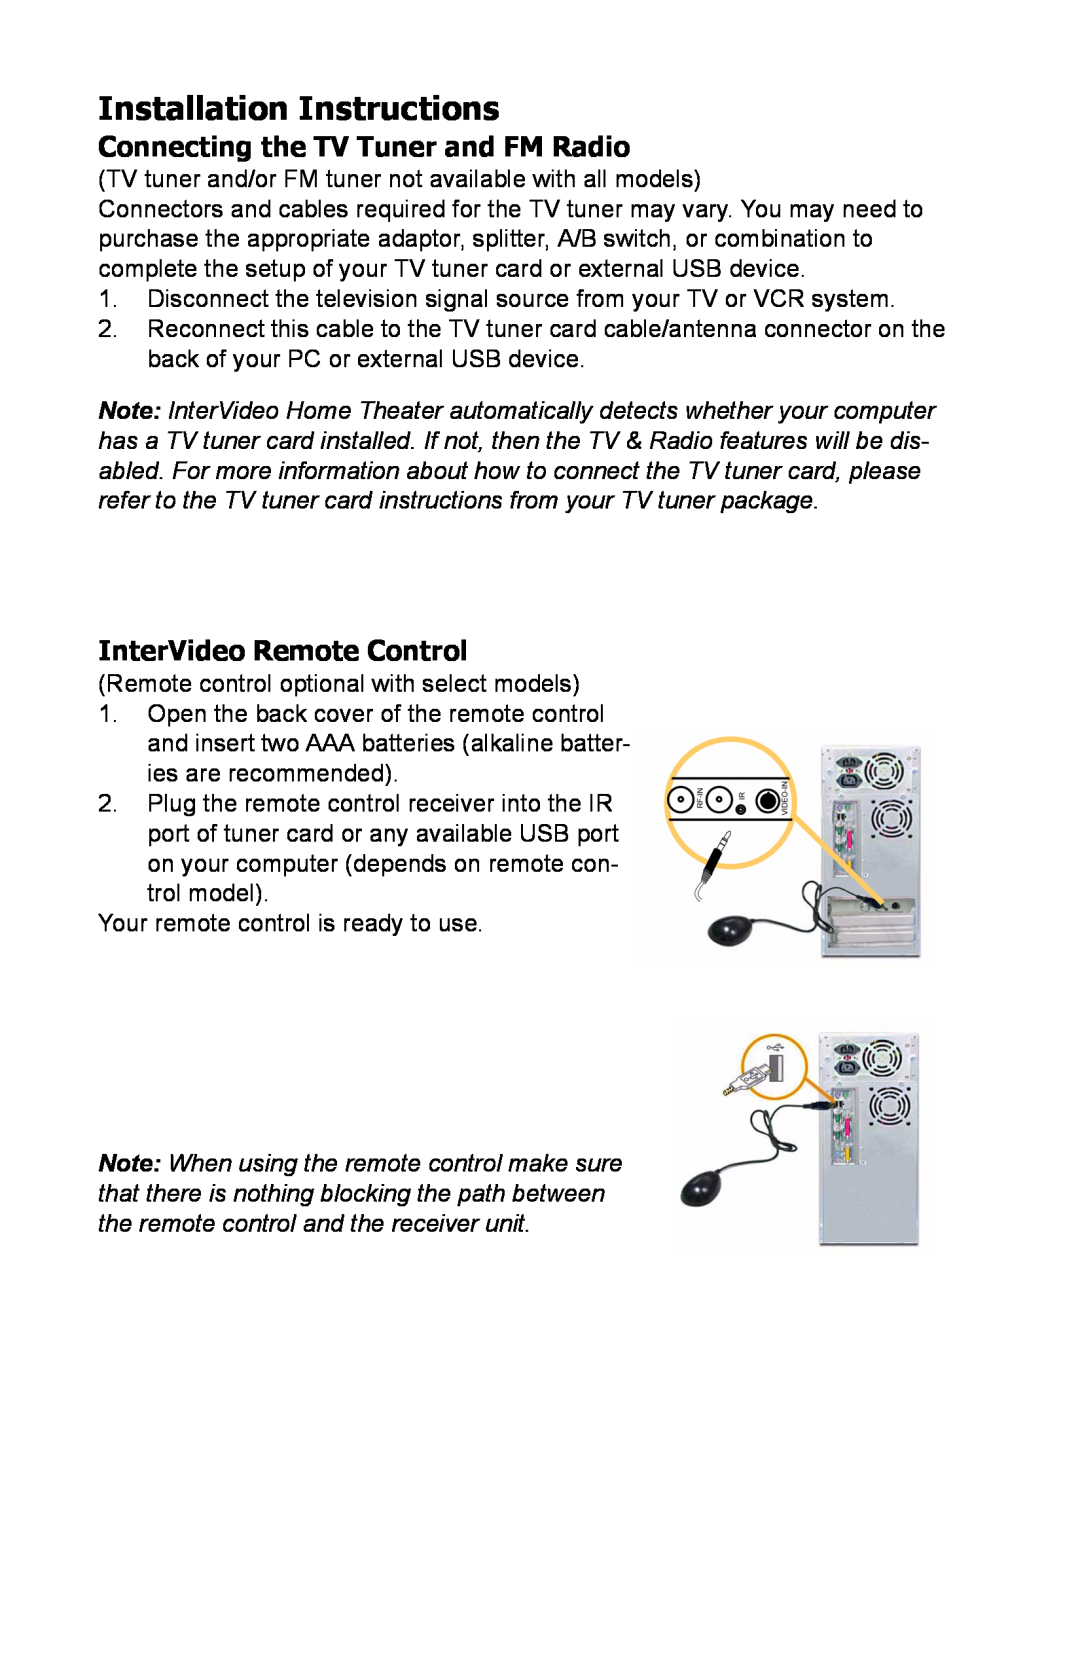 HP a1338hk, a1260a, a1370a manual Installation Instructions, Connecting the TV Tuner and FM Radio, InterVideo Remote Control 